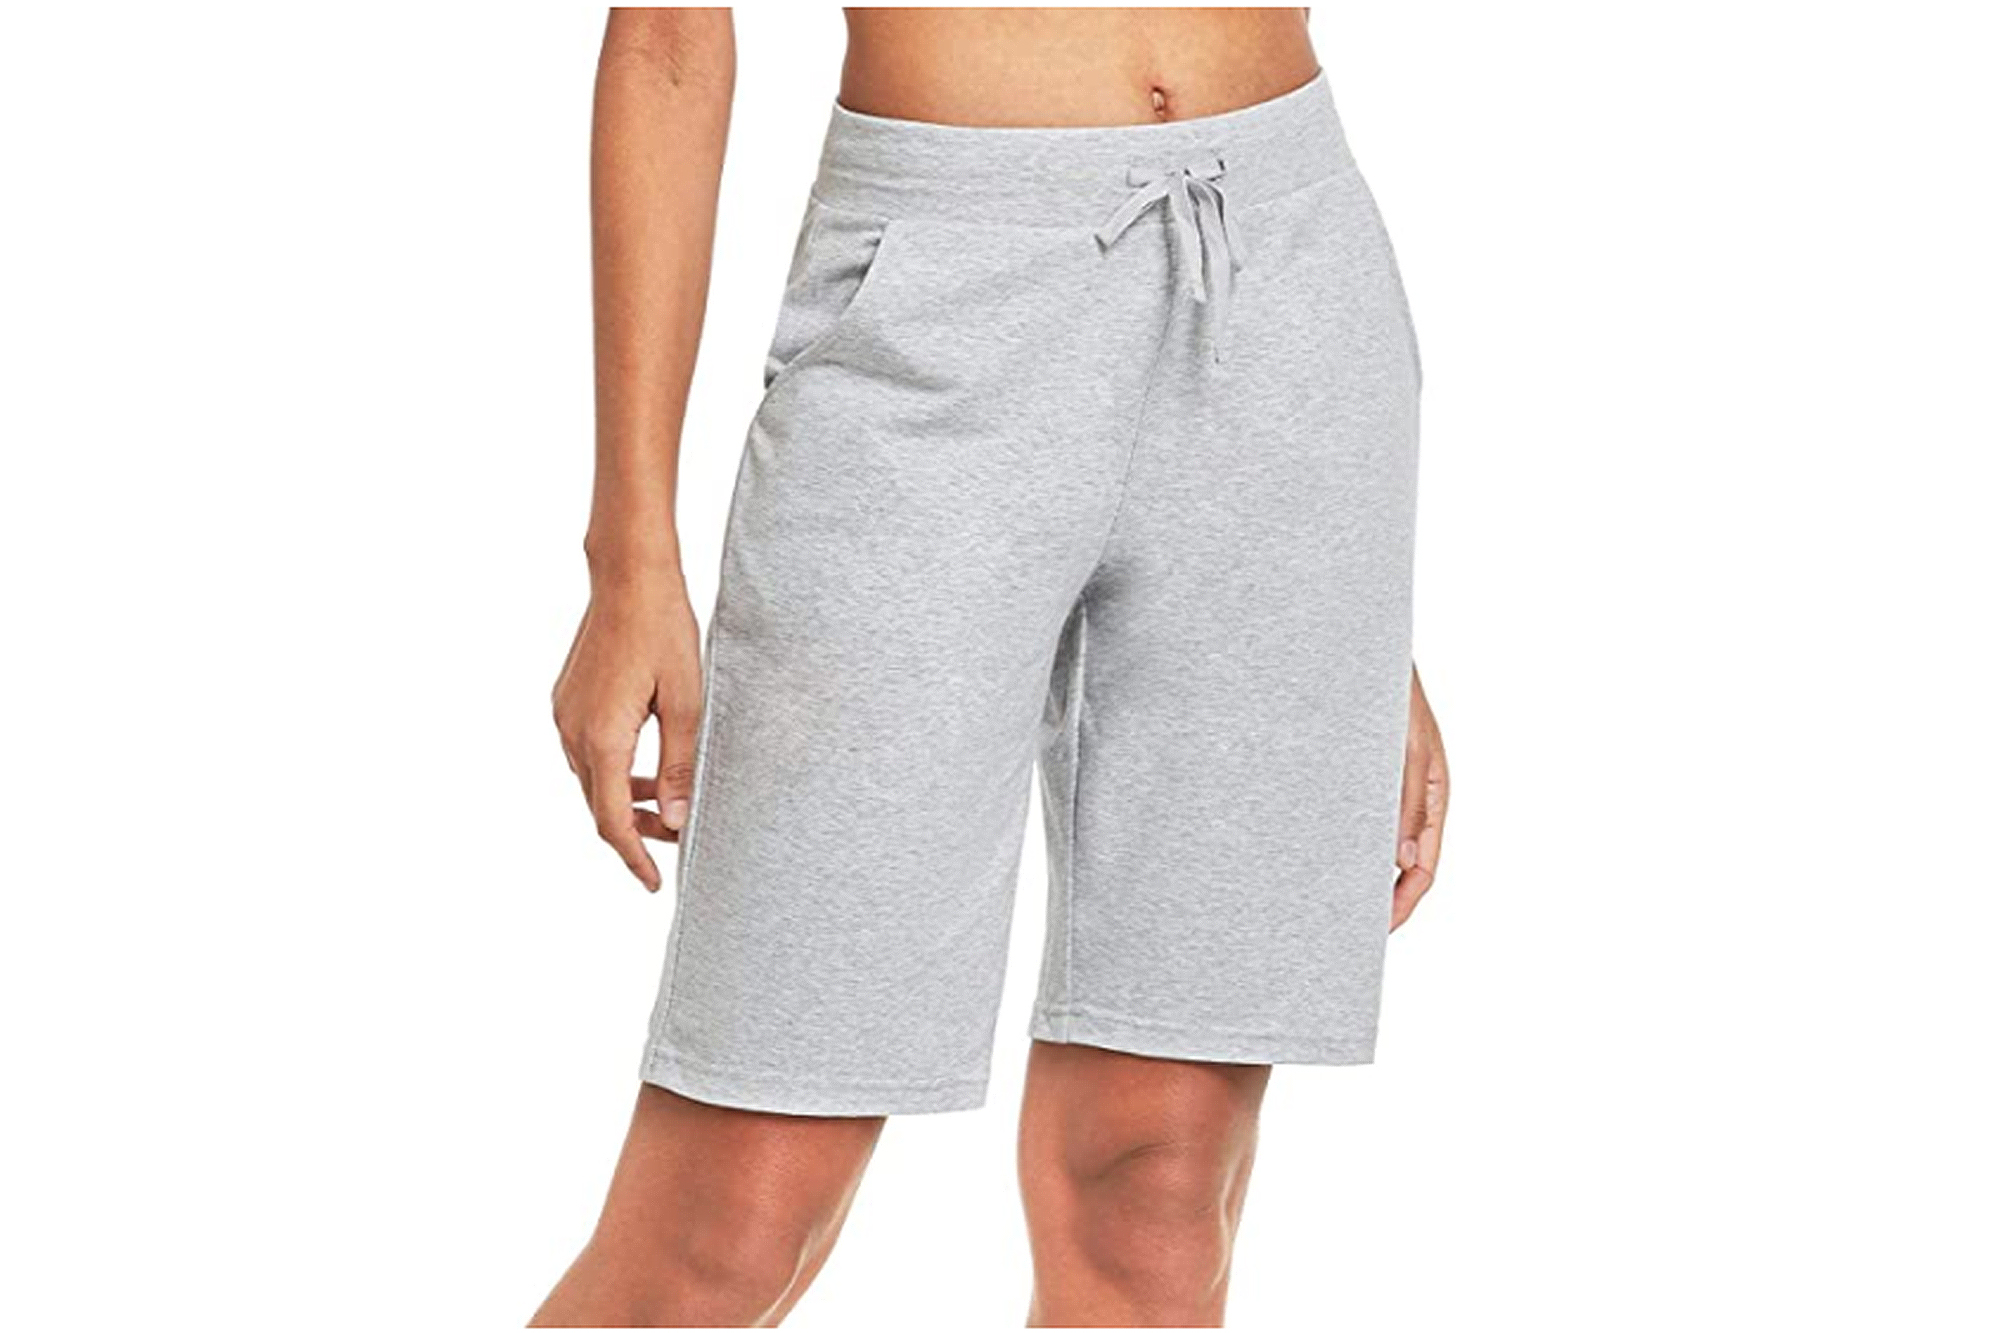 BALEAF Short Sweats Are the Perfect Casual Lounge Shorts